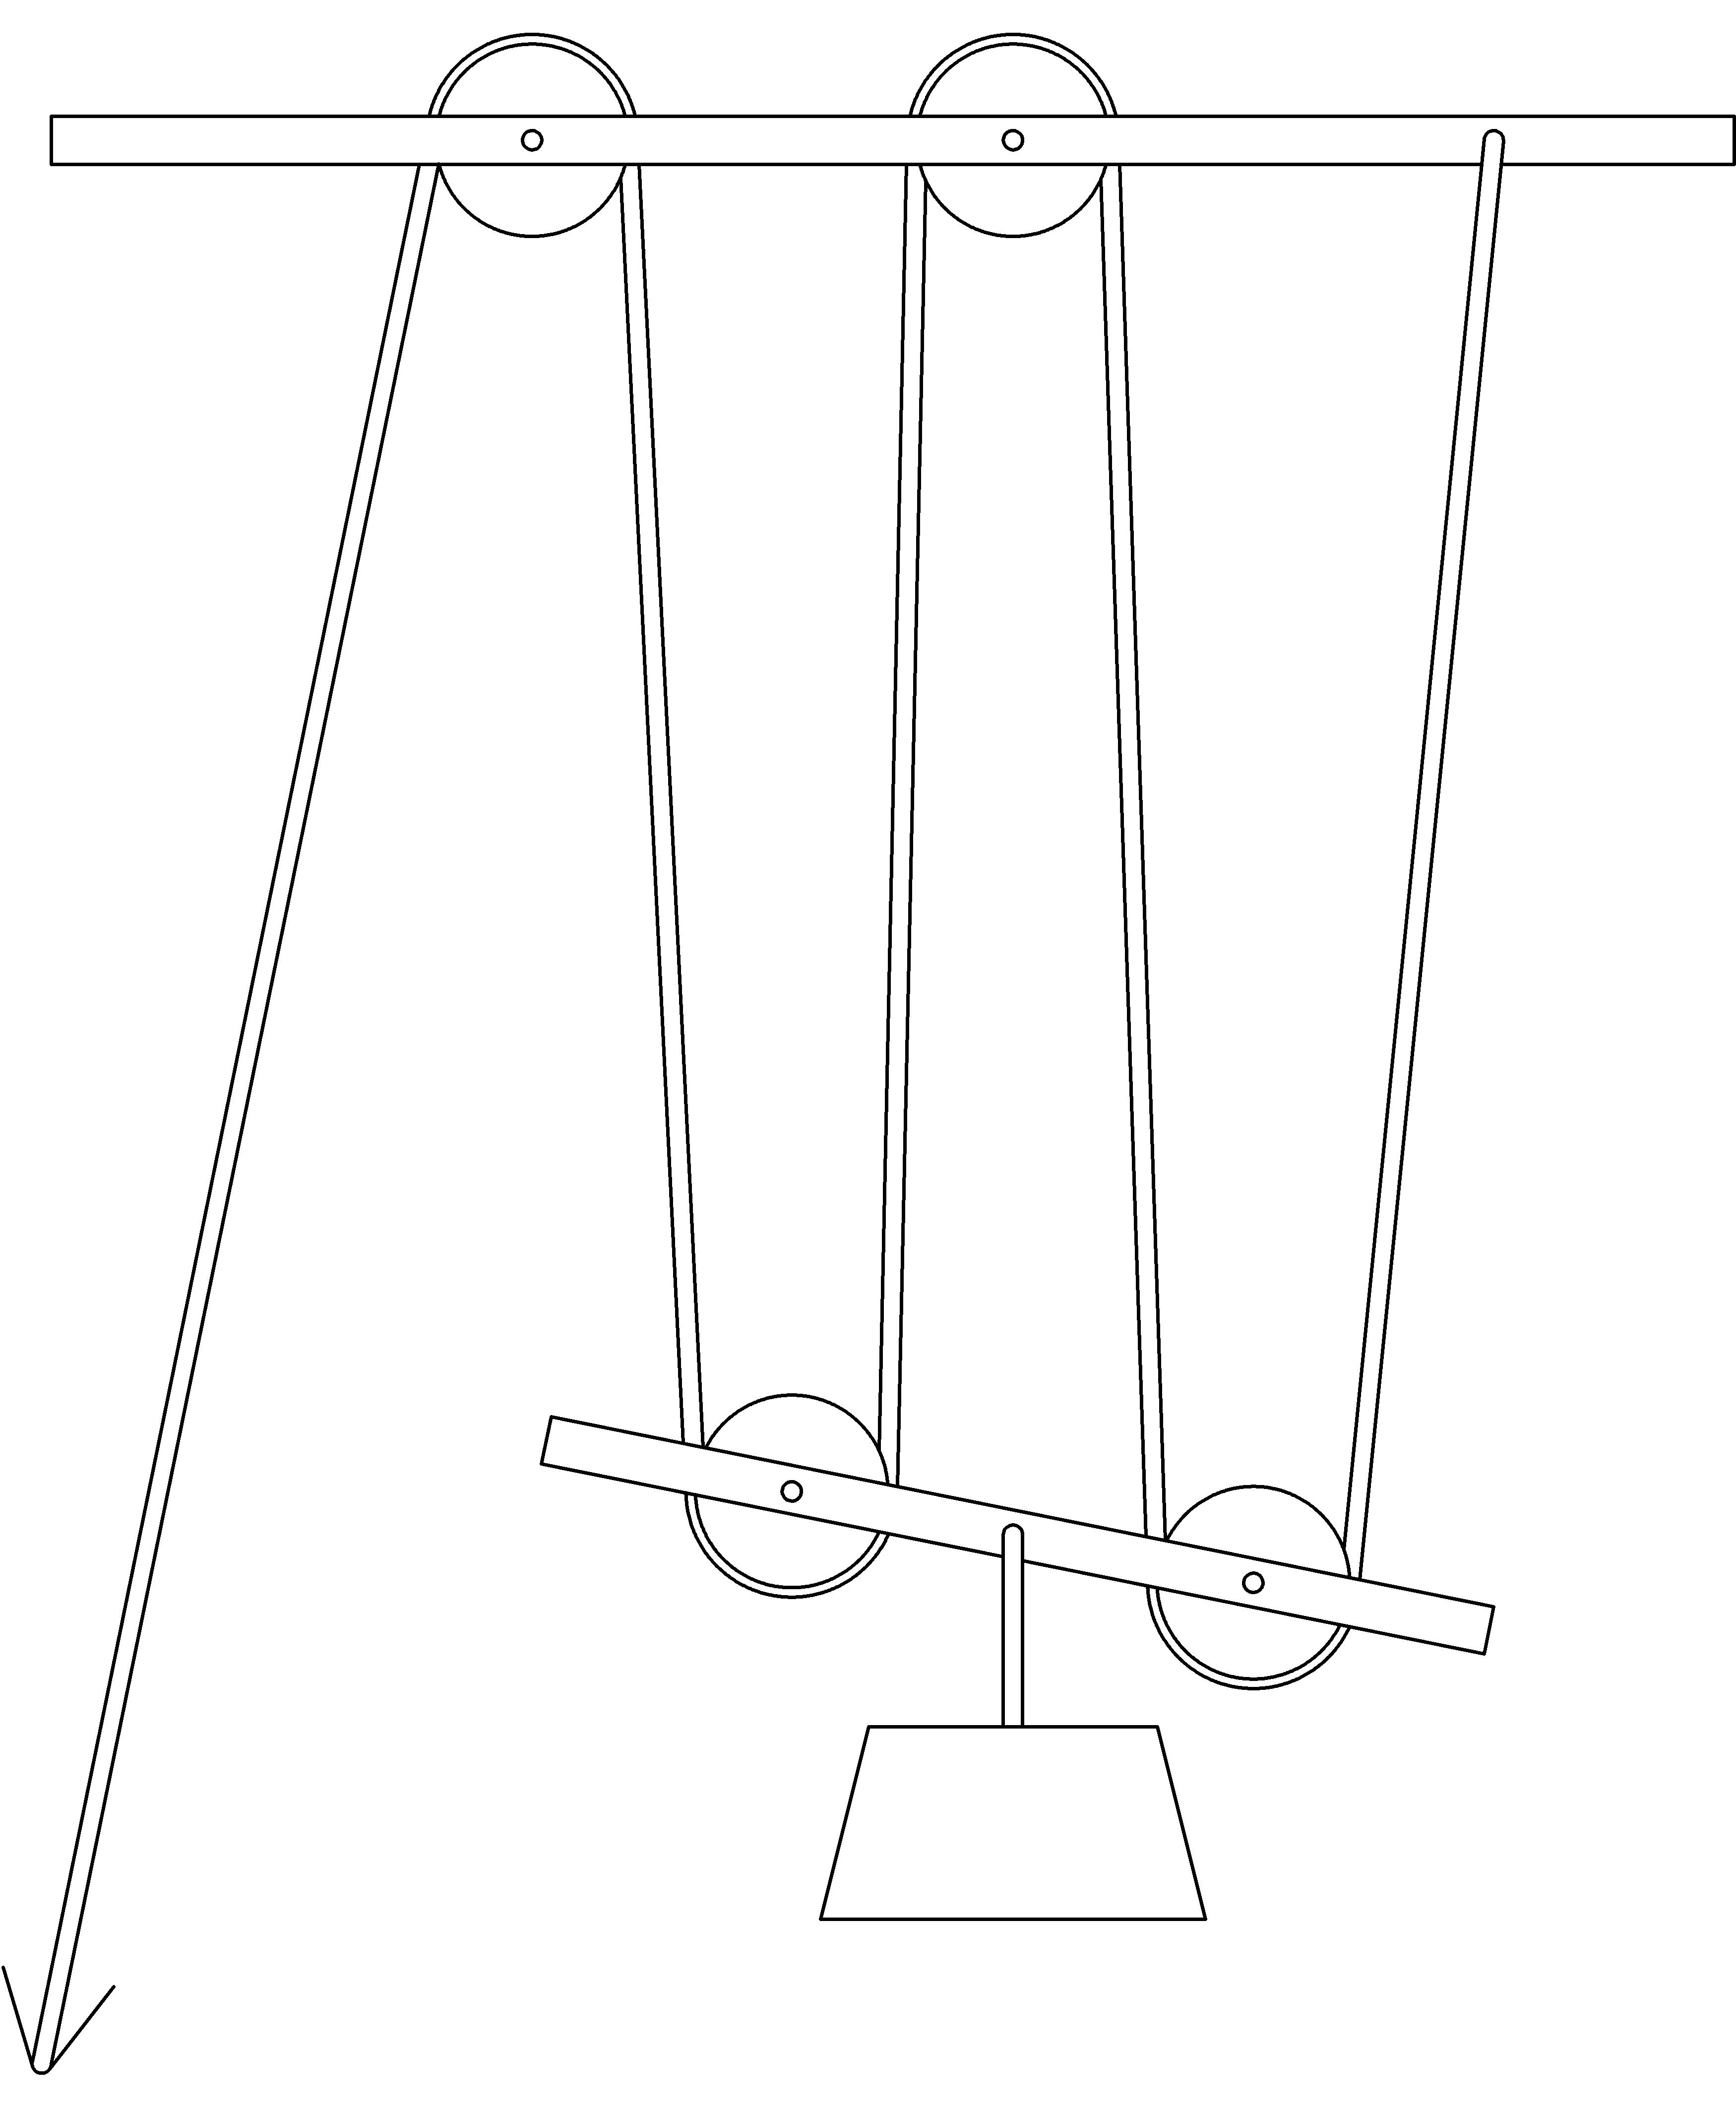 figure PulleySys2.png